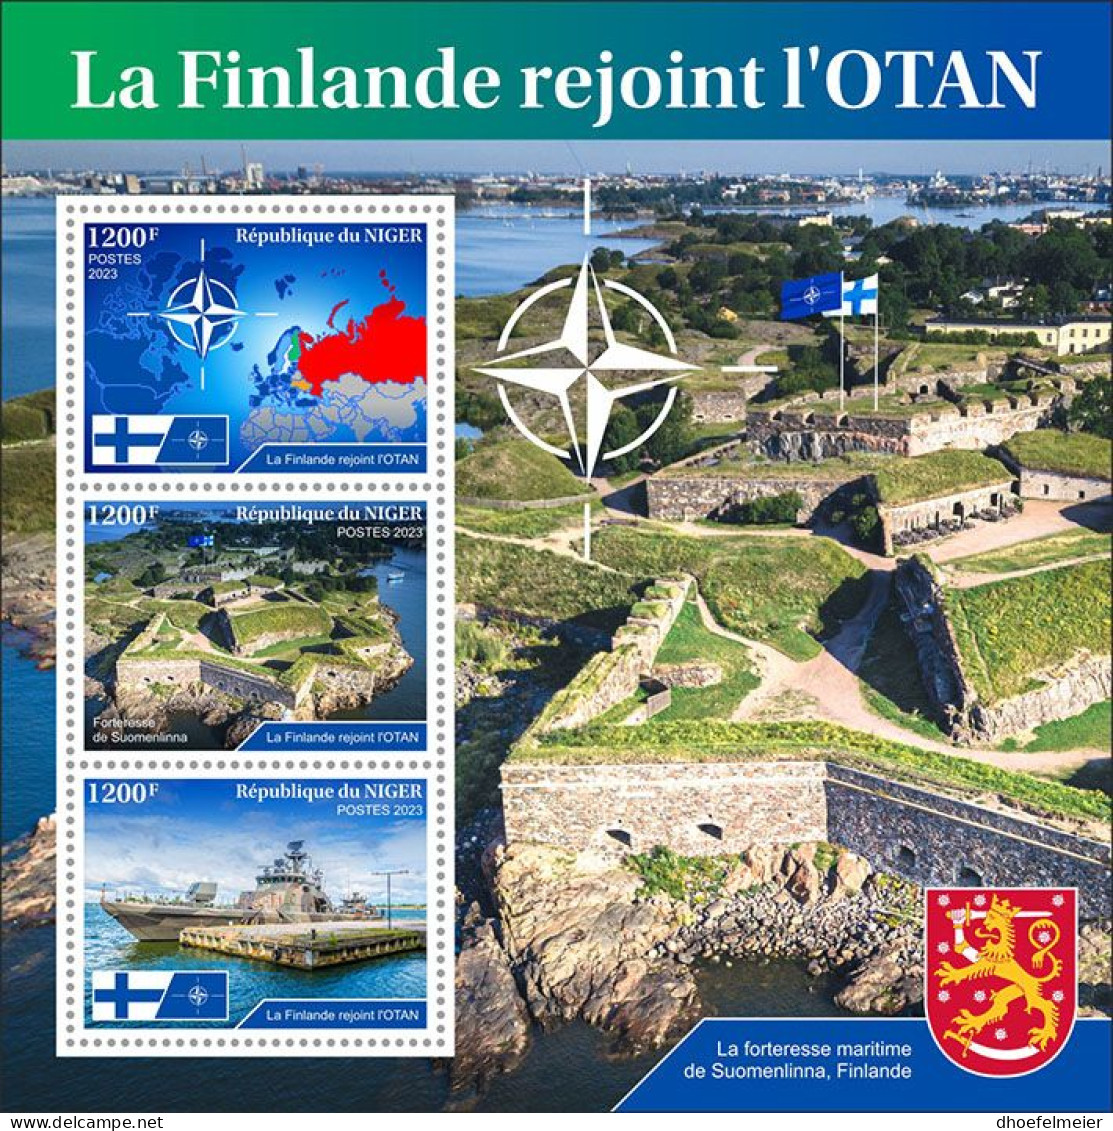 NIGER 2023 MNH Finland Joins NATO Mitgliedschaft M/S – OFFICIAL ISSUE – DHQ2347 - NATO